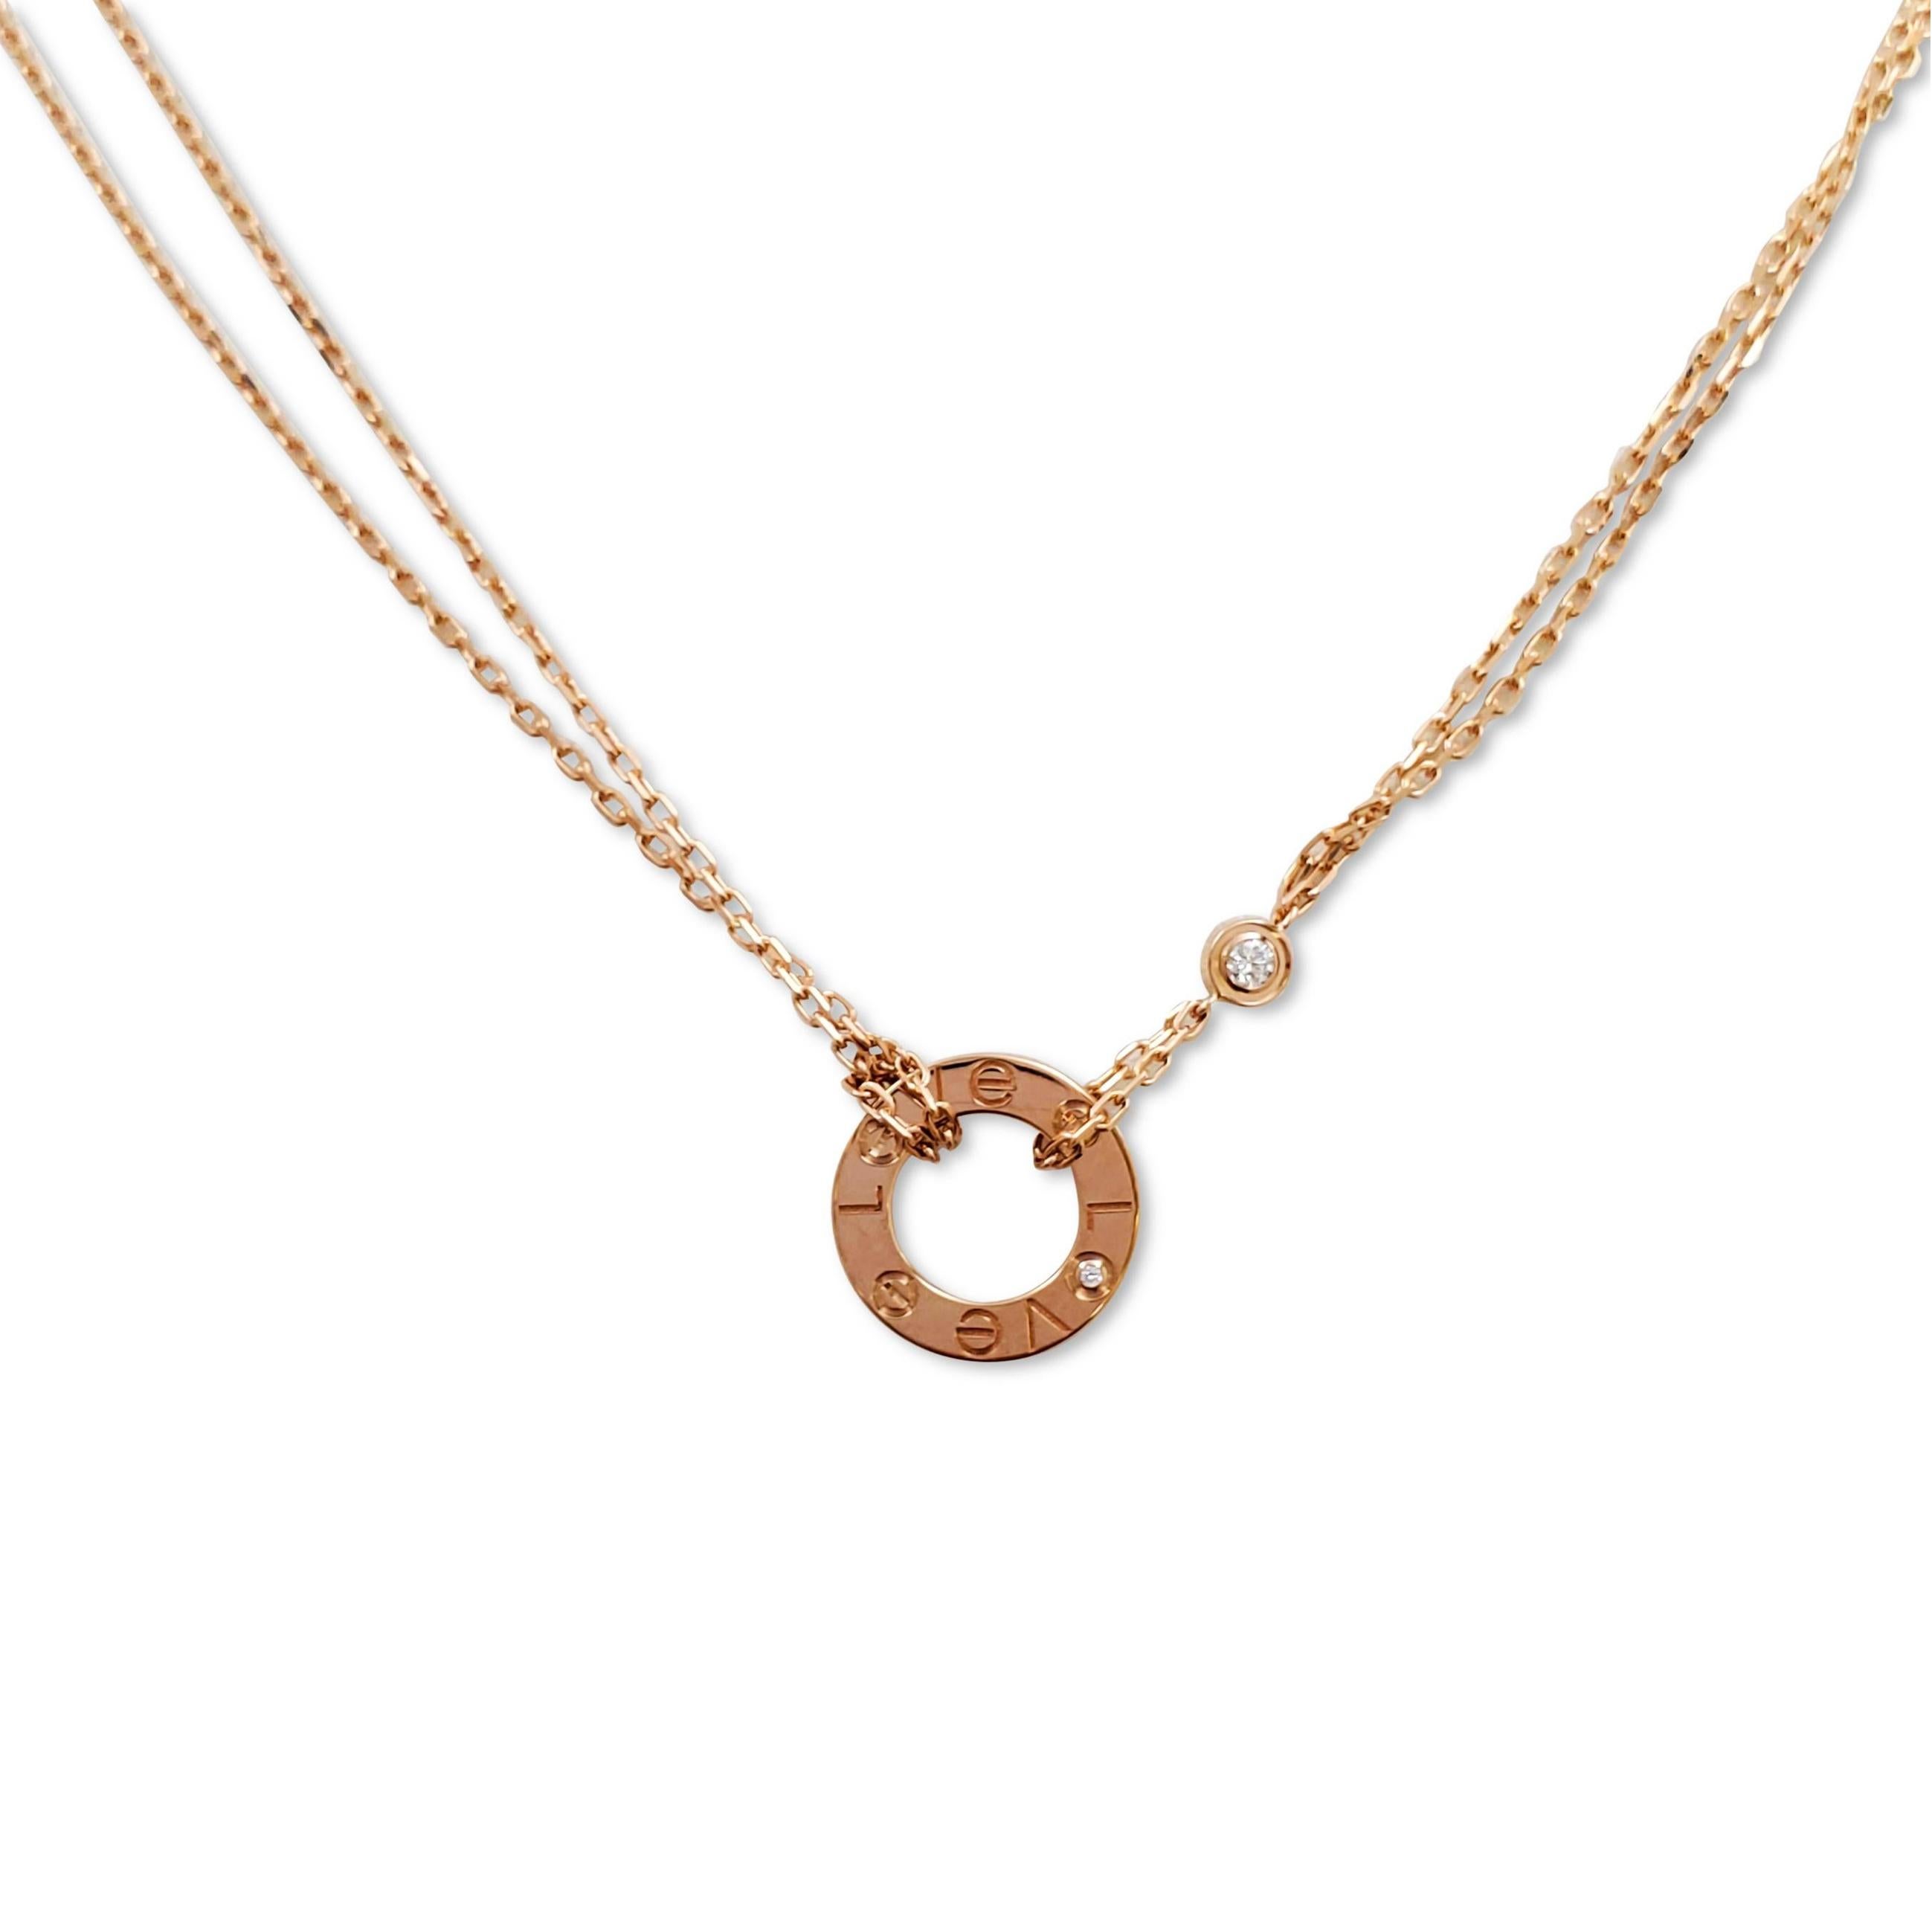 Authentic chain and ring charm necklace from the Cartier 'Love' collection. Crafted in 18 karats rose gold, the double-strand oval-link adjustable chain features a half-inch round ring and screw top motifs set with two round brilliant cut diamonds